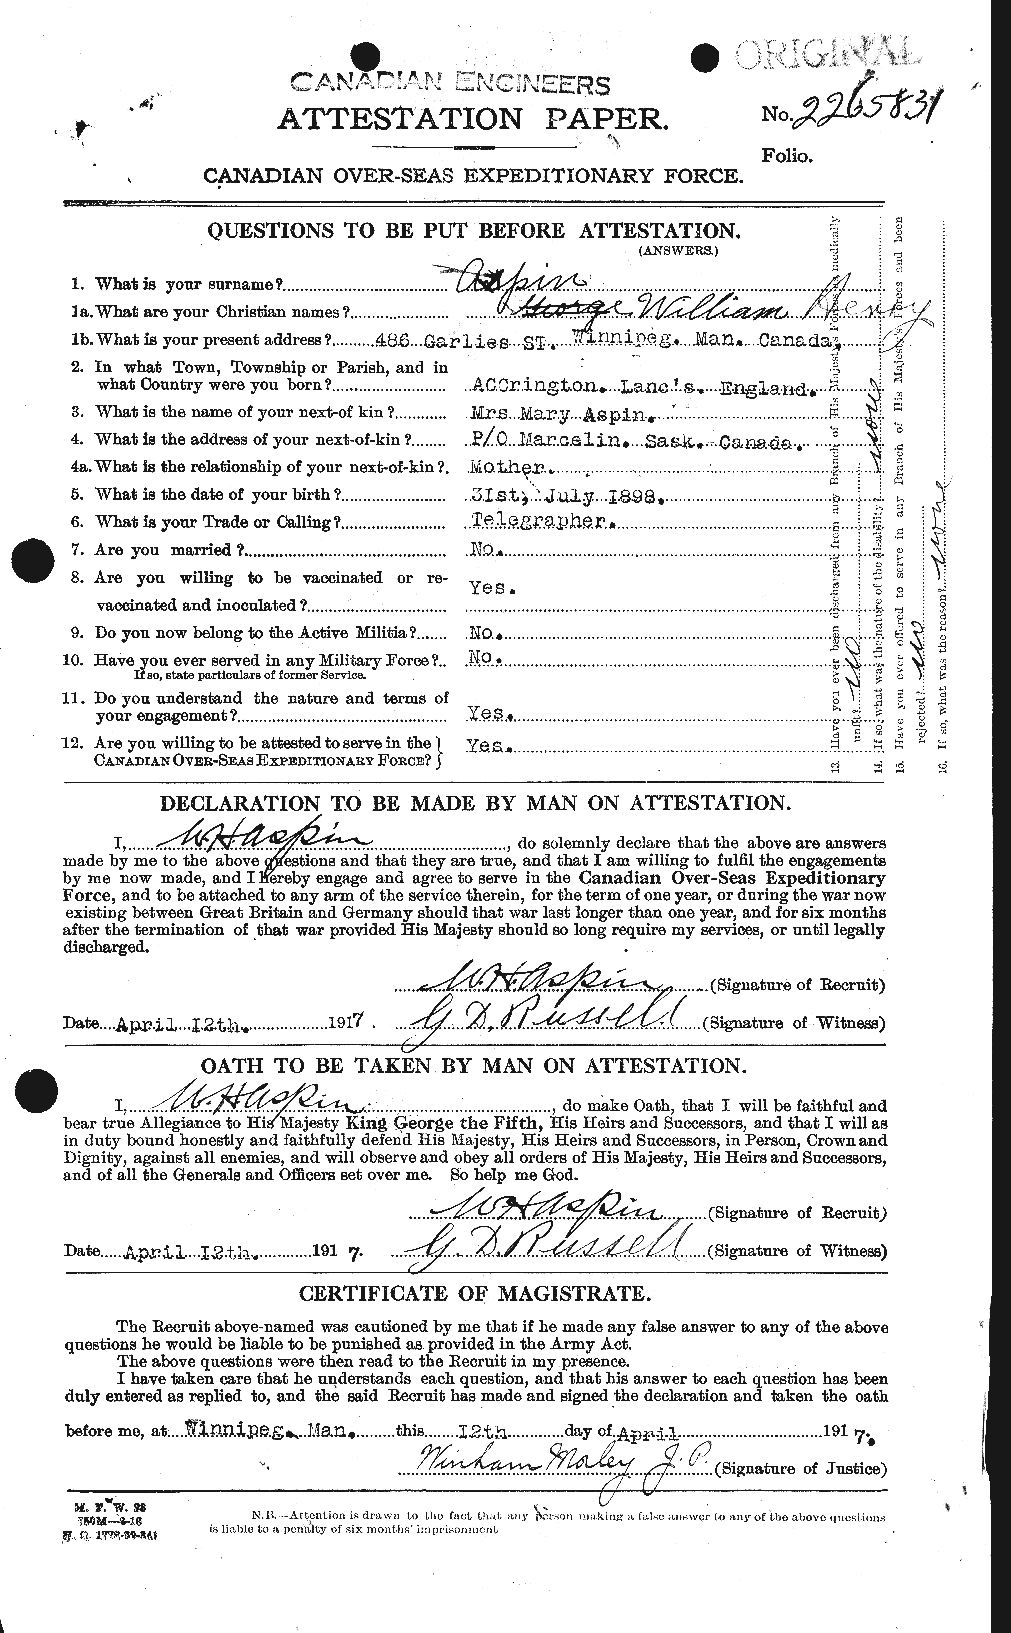 Personnel Records of the First World War - CEF 223580a